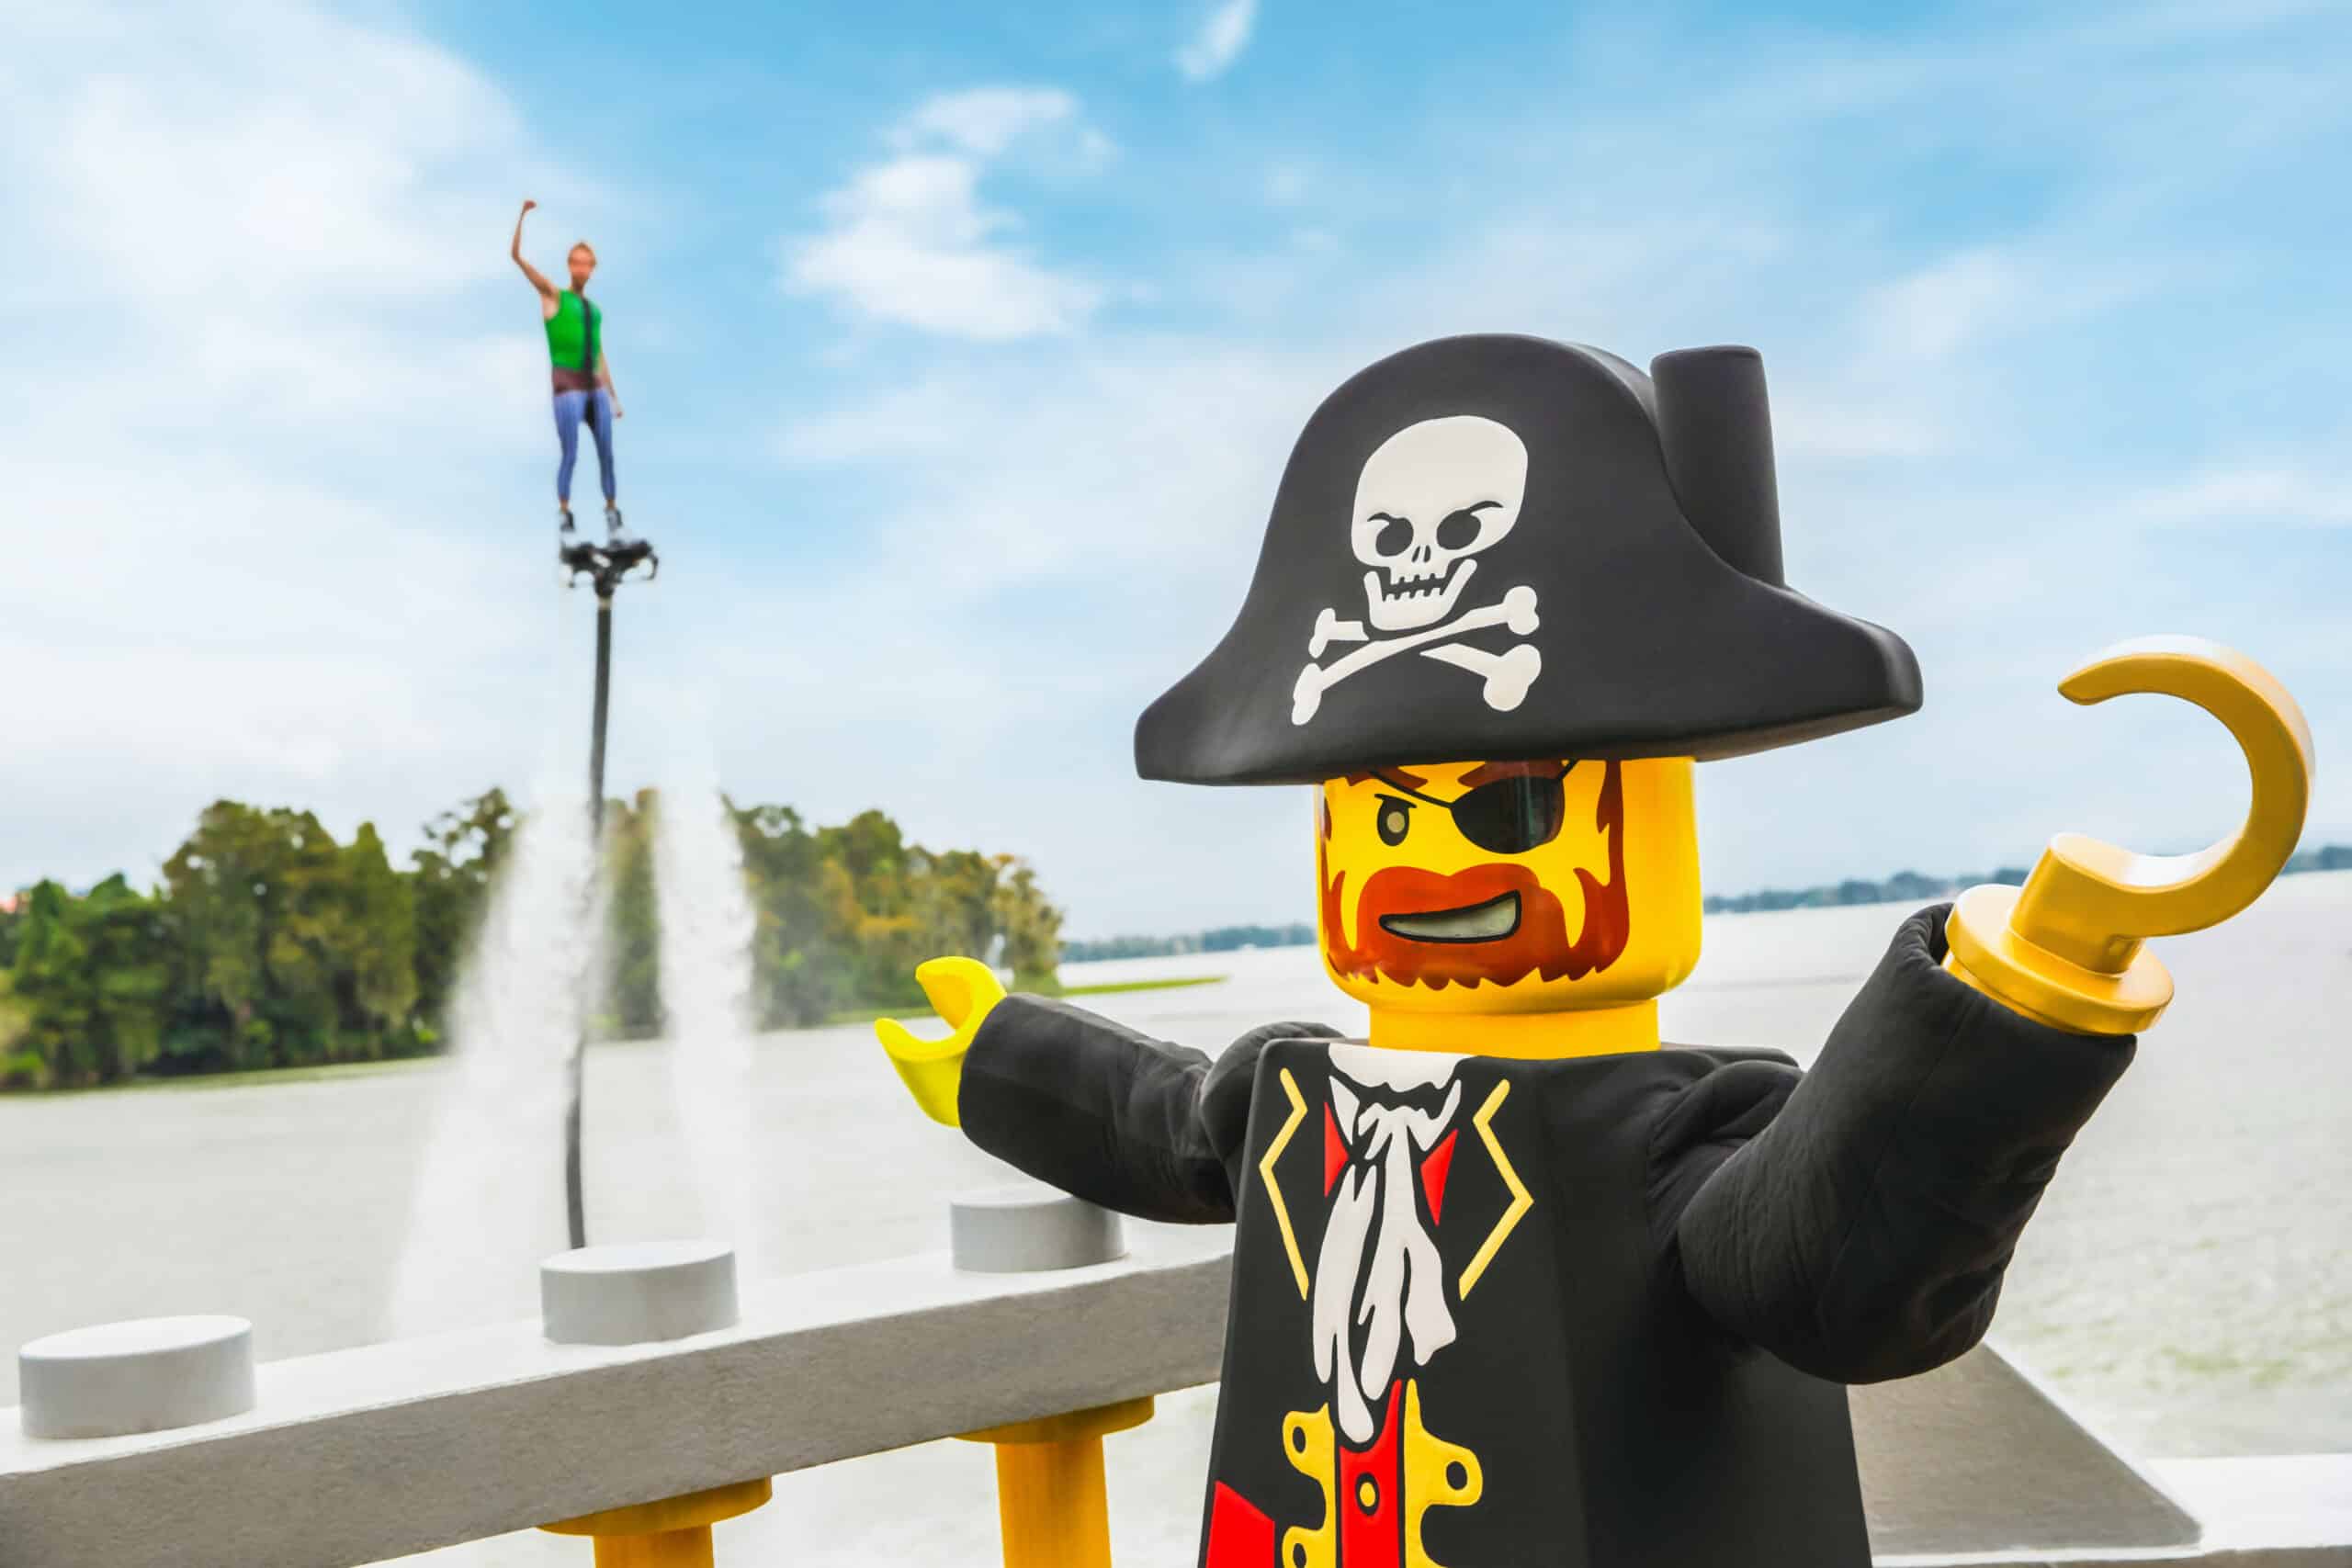 <p>Kids and adults who loved the world-renowned Cypress Gardens Ski Show will get a kick out of the new Lego-theme show in the same waters. This 20-minute water stunt show occurs at noon, 2 pm, and 4 pm. Come a little bit before show time to secure a seat in the shade.</p>